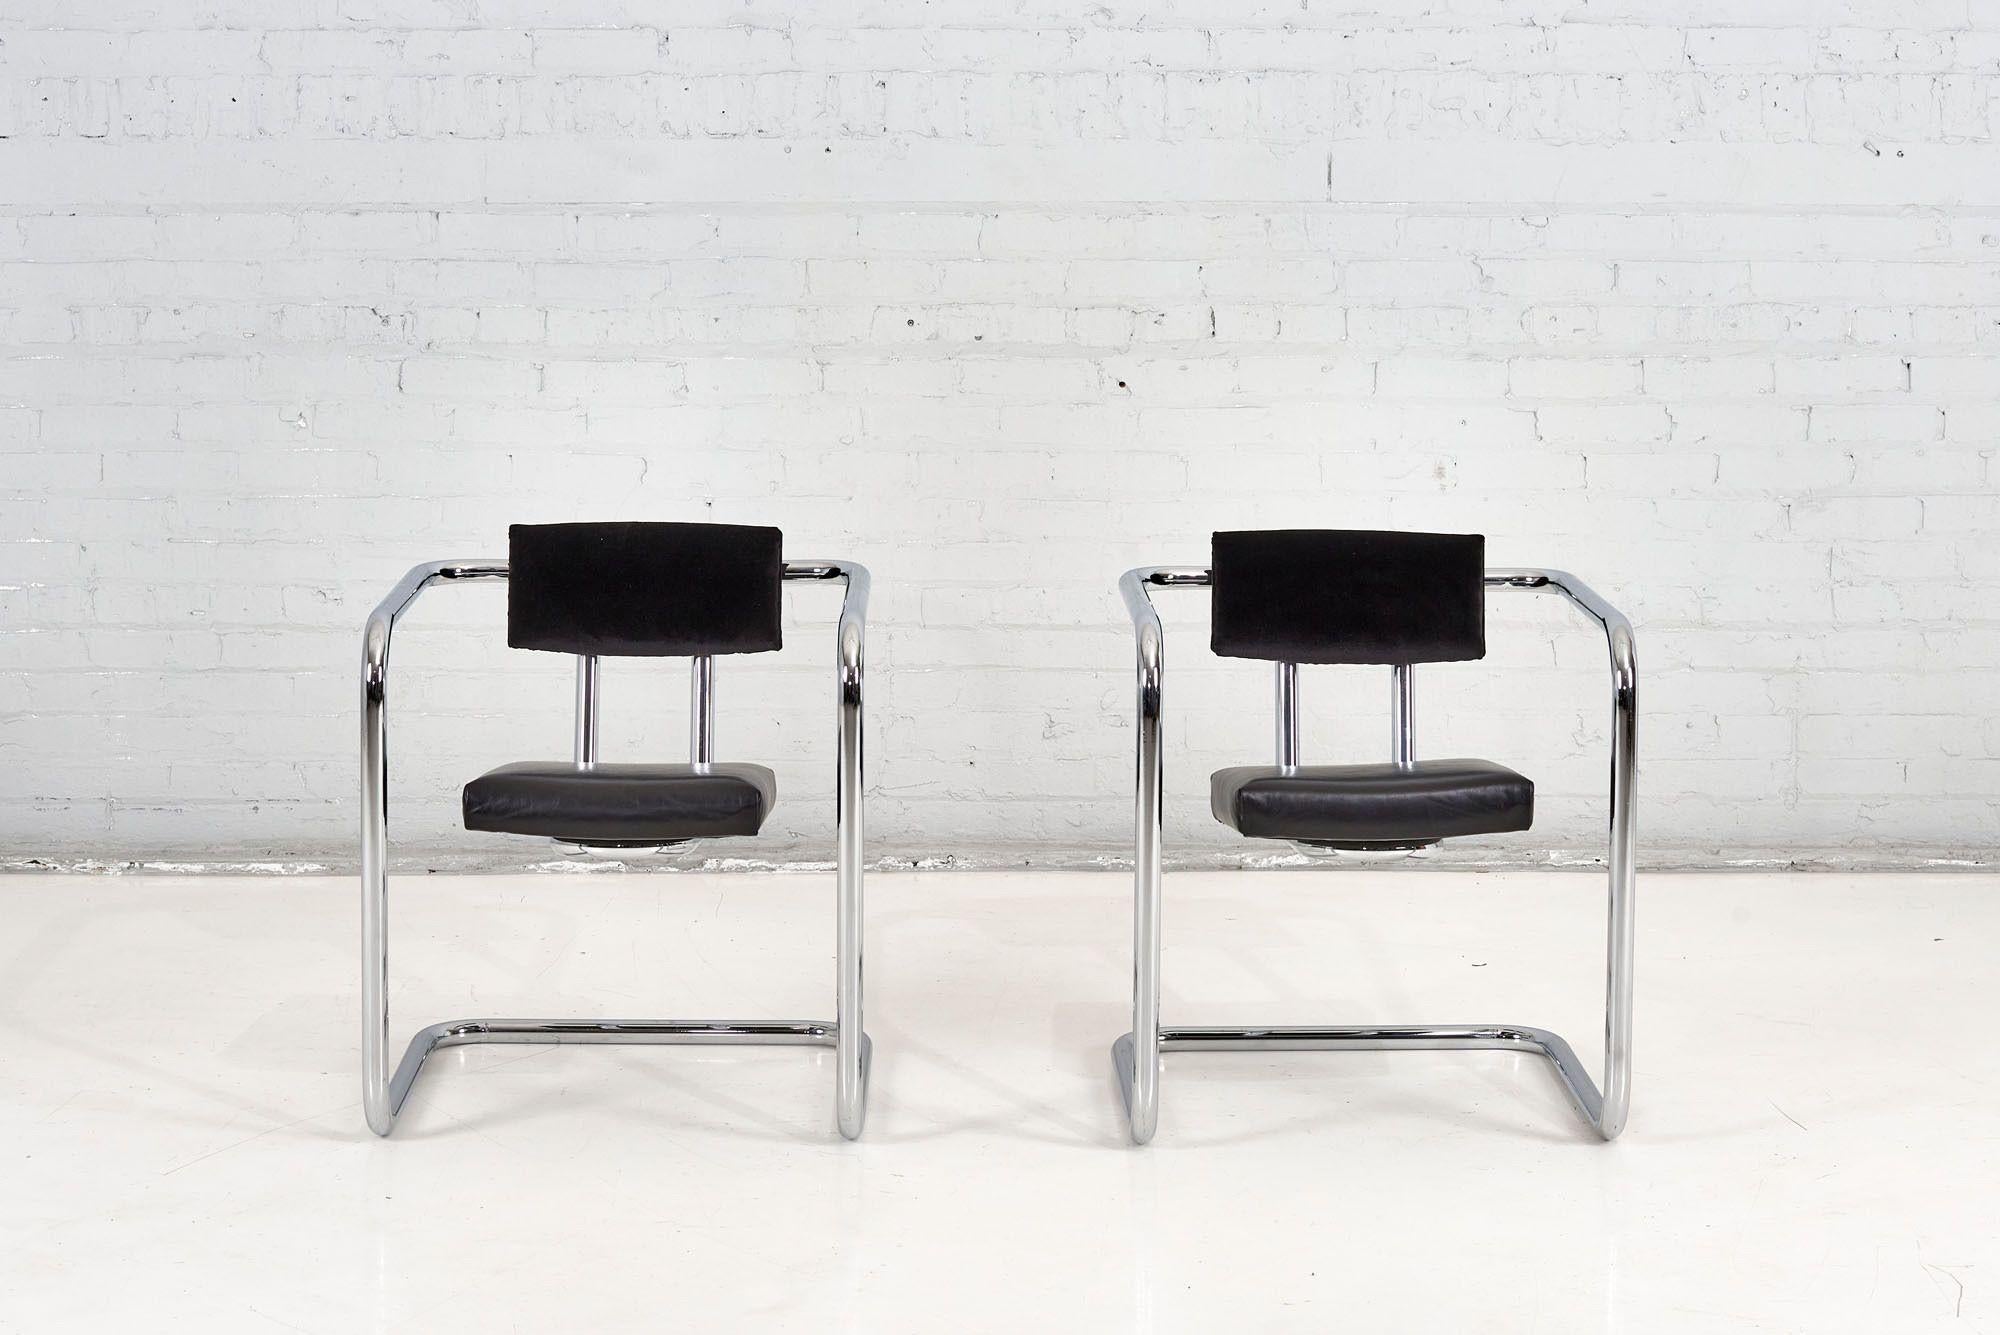 Italian tubular chrome and leather lounge chairs, 1960. Newly reupholstered in black leather.

